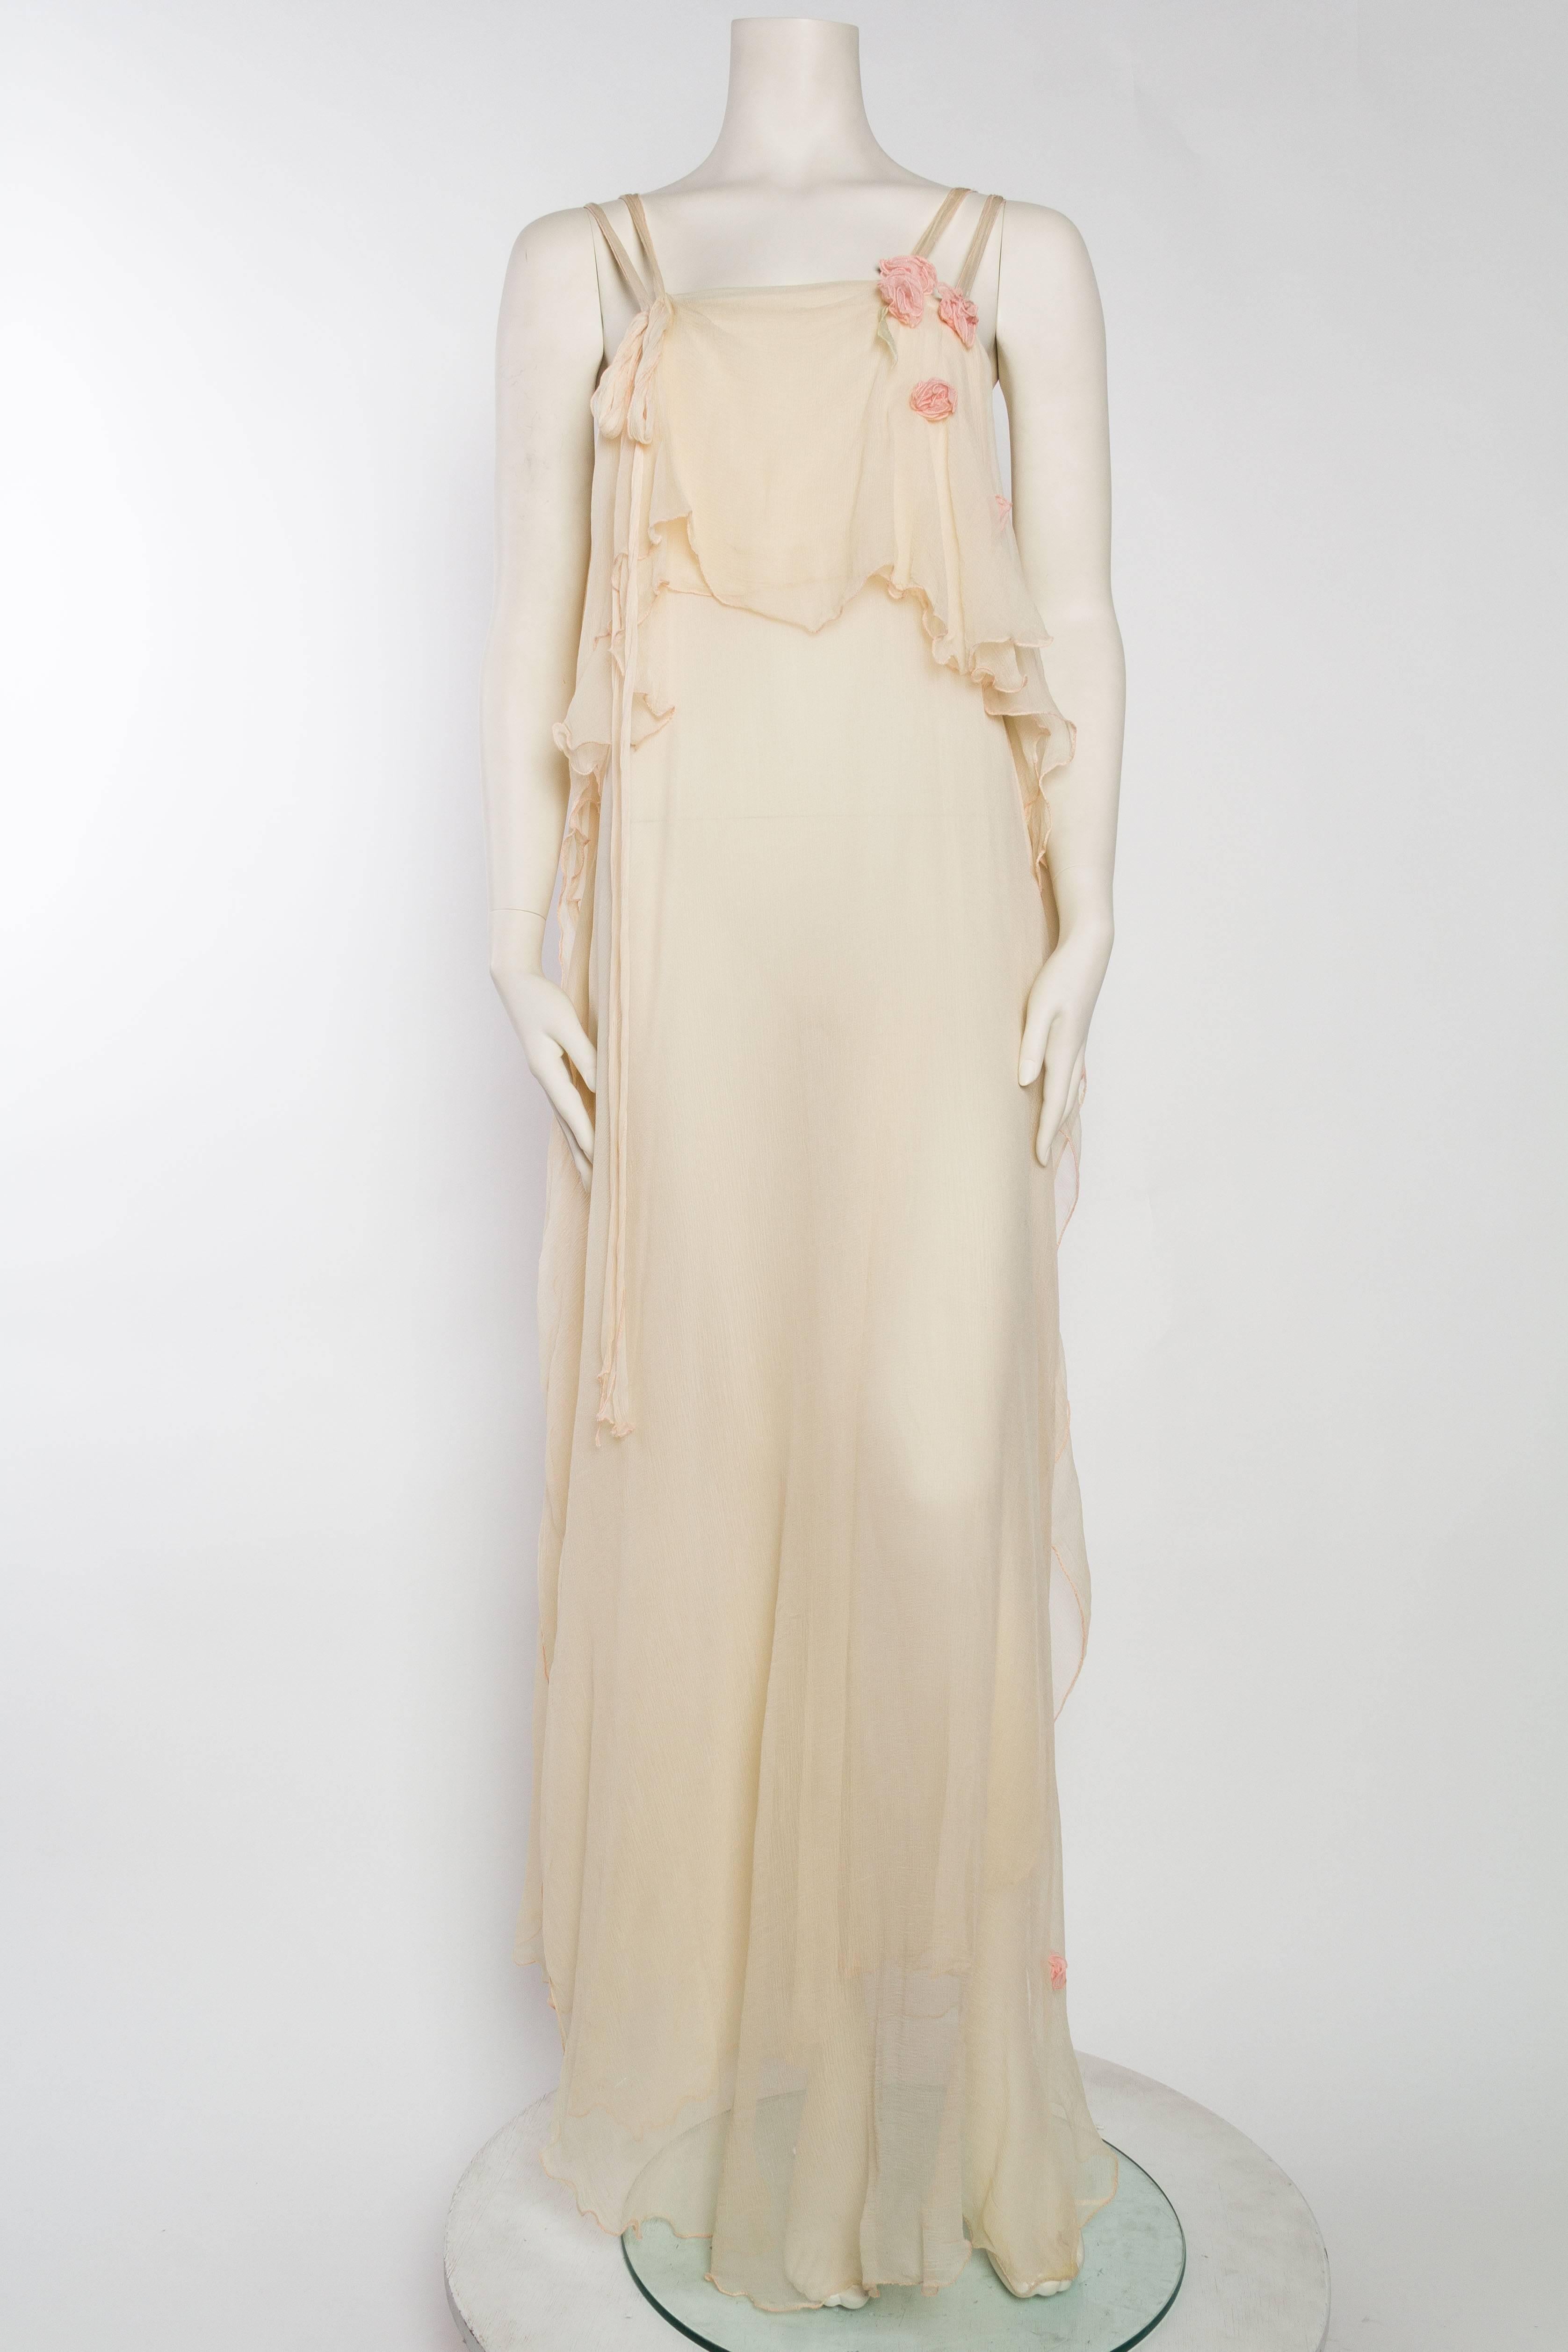 Romantic layers of chiffon from the 1970s evocative of a medieval forrest nymph. Sprinkled with pink roses and ready to dance around the garden in celebration of spring. 